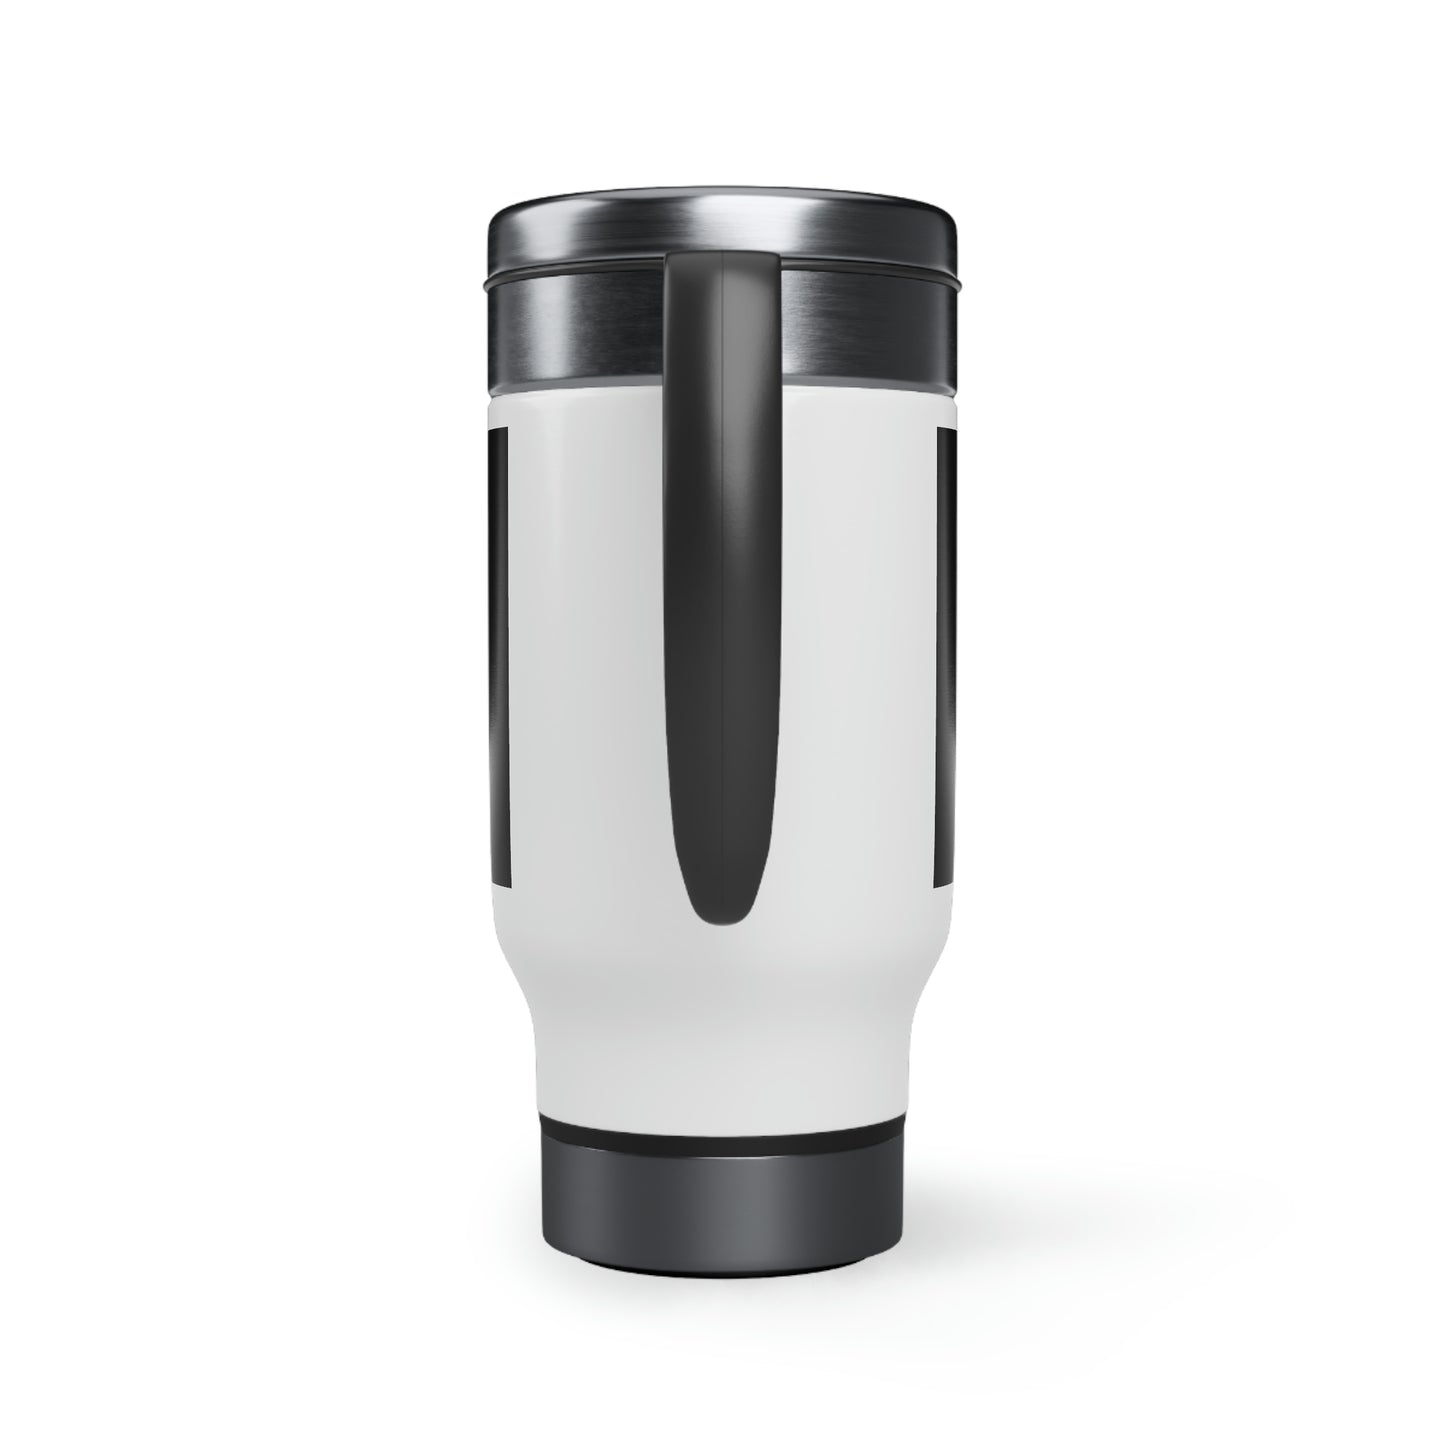 Product of Prayer promise and perseverance Stainless Steel Travel Mug with Handle, 14oz